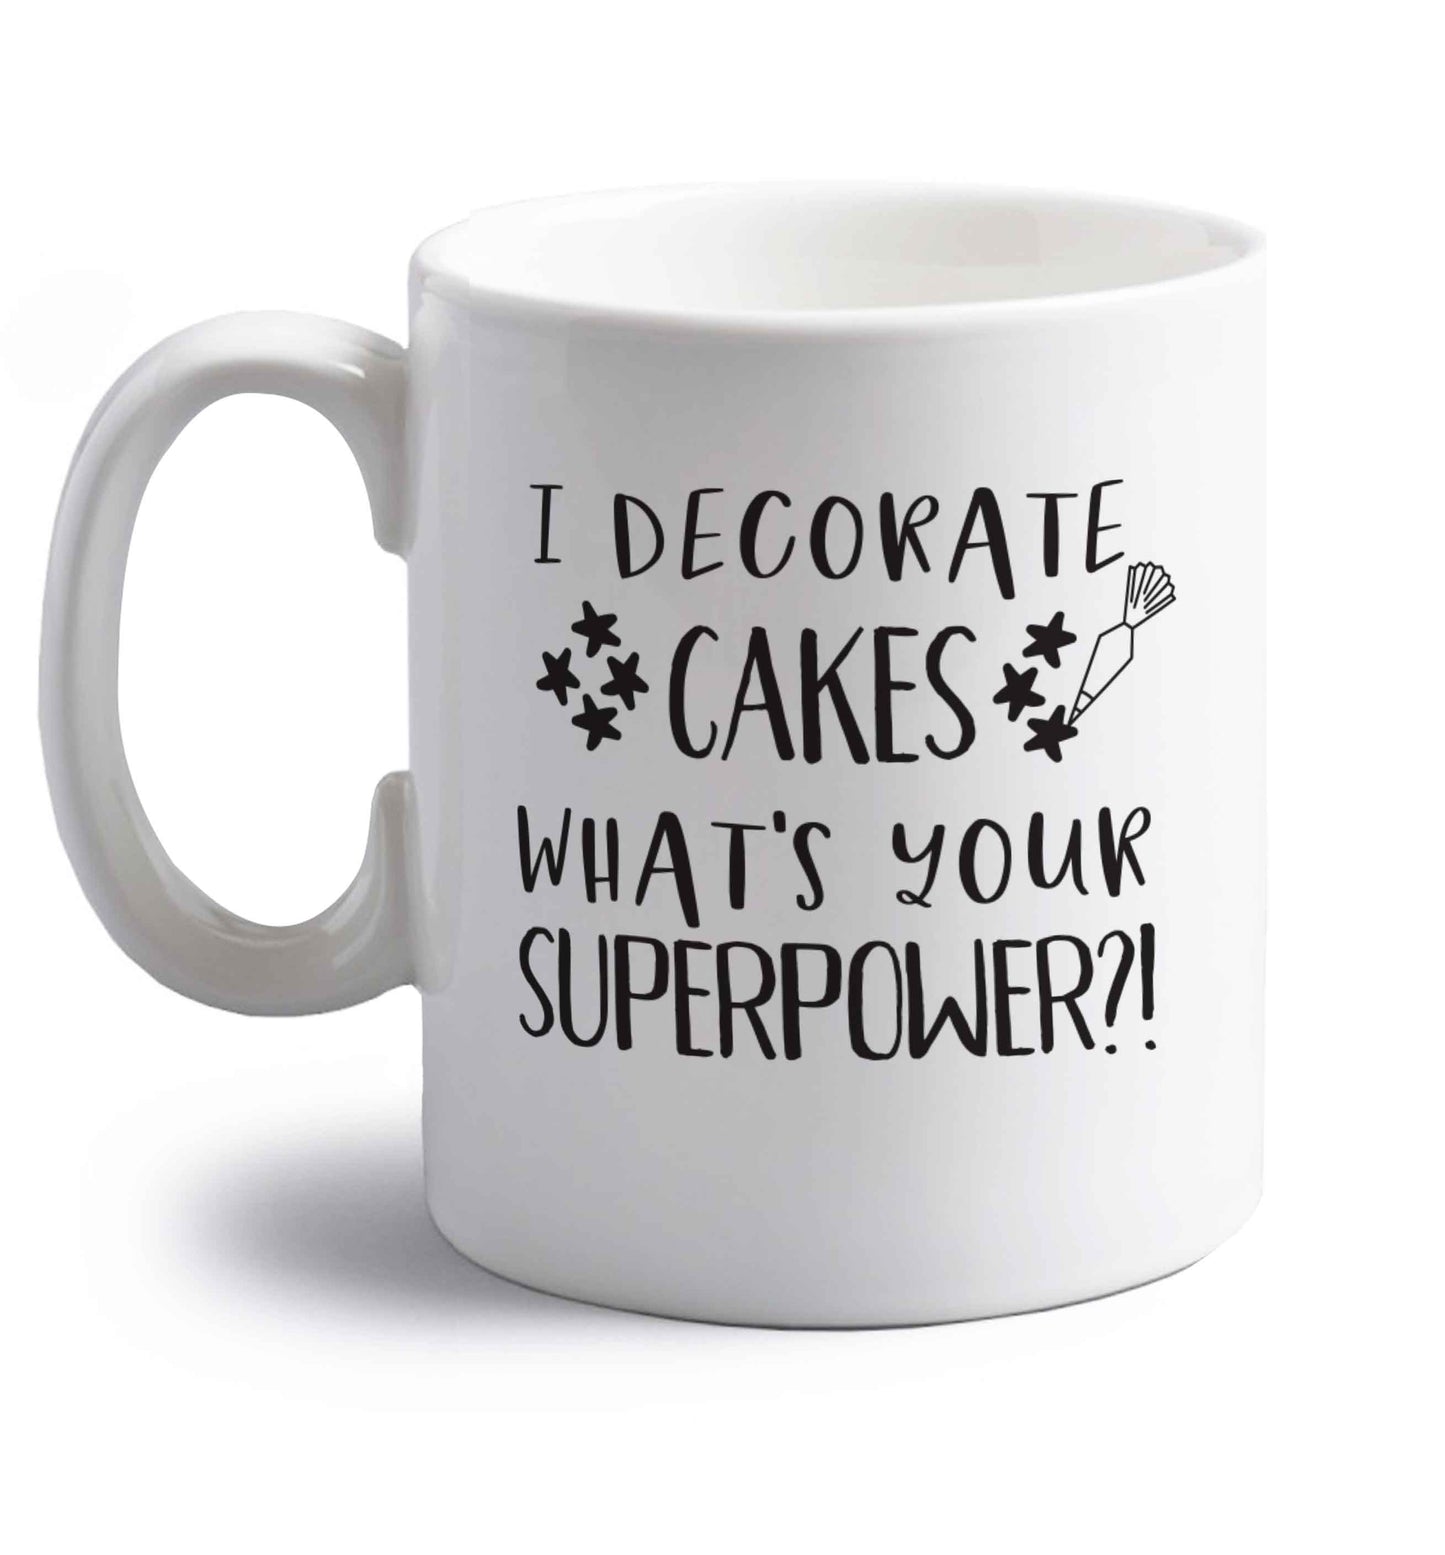 I decorate cakes what's your superpower?! right handed white ceramic mug 